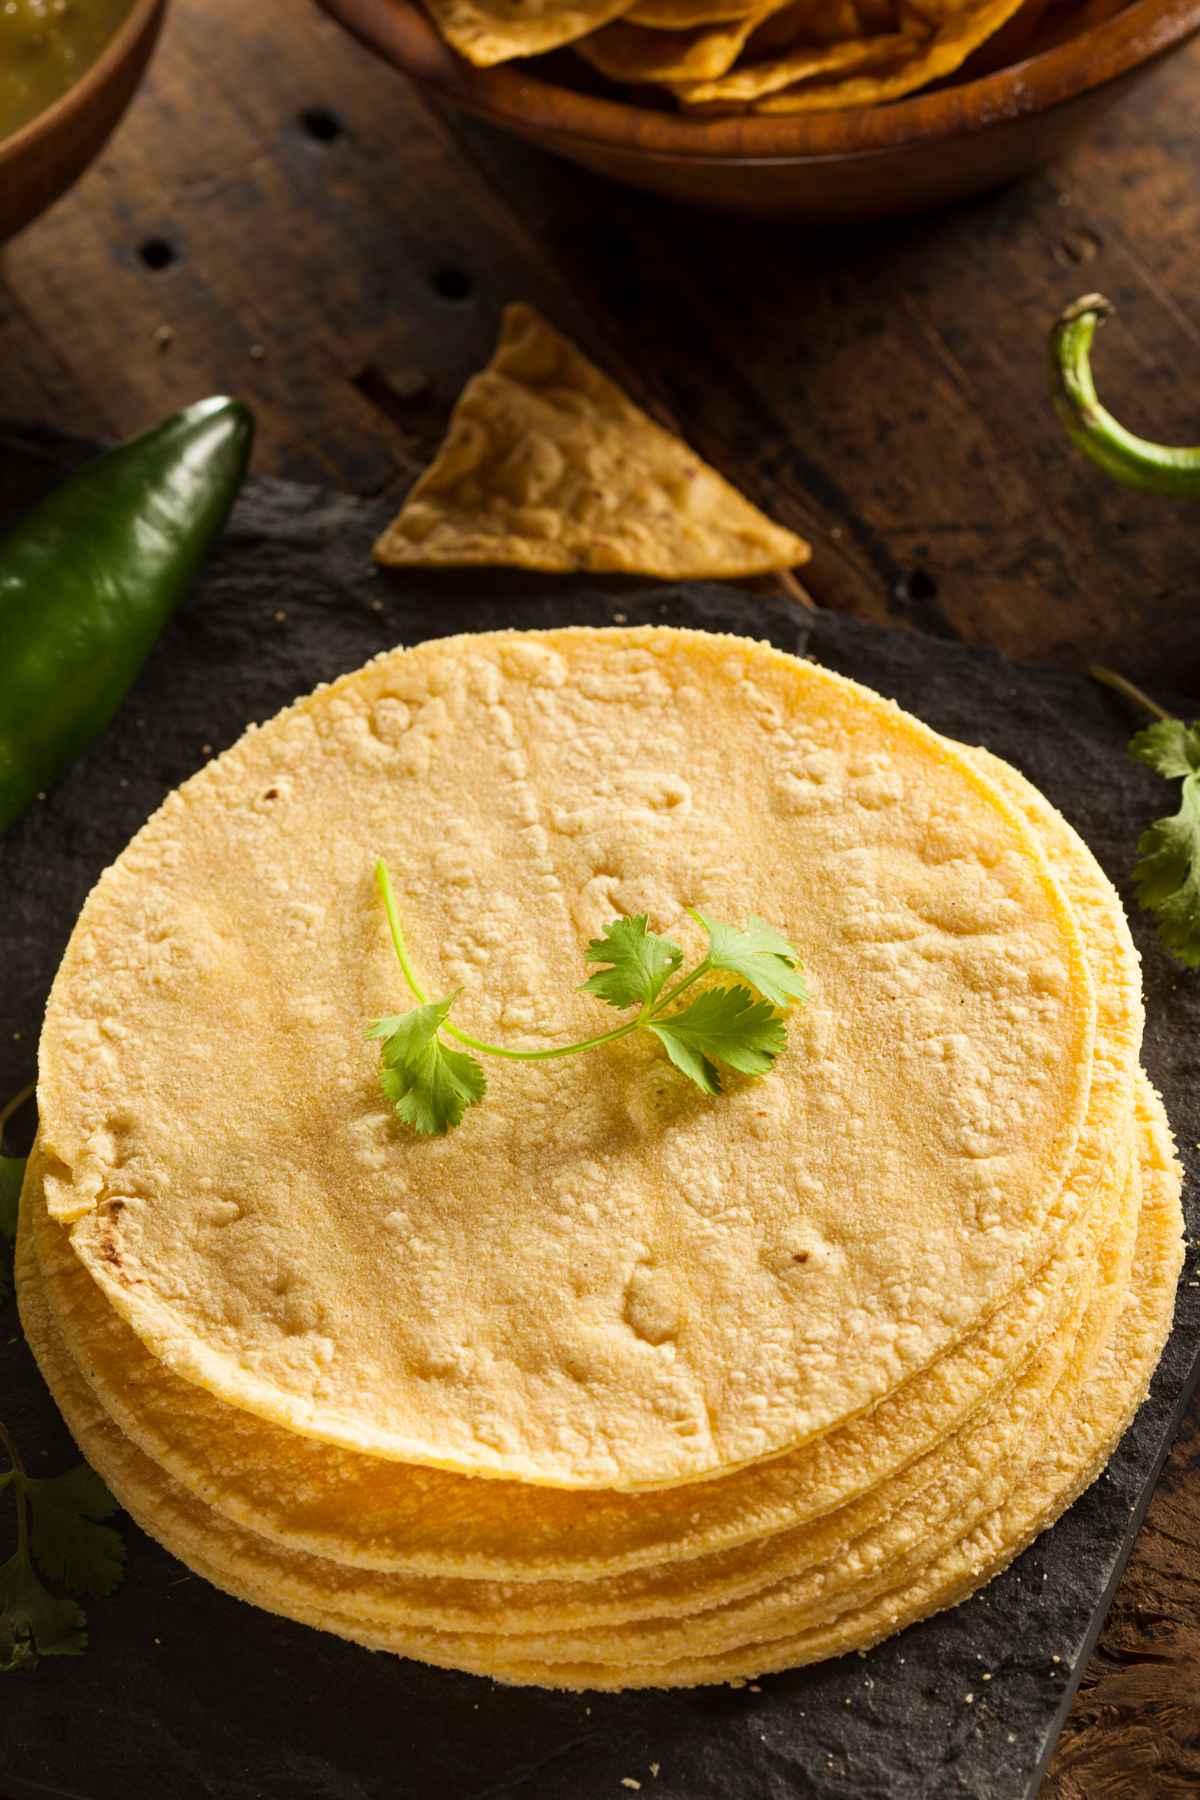 How many carbs do tortillas have? Are they suitable for a keto diet? Read on to find out more about corn tortillas and your keto diet.